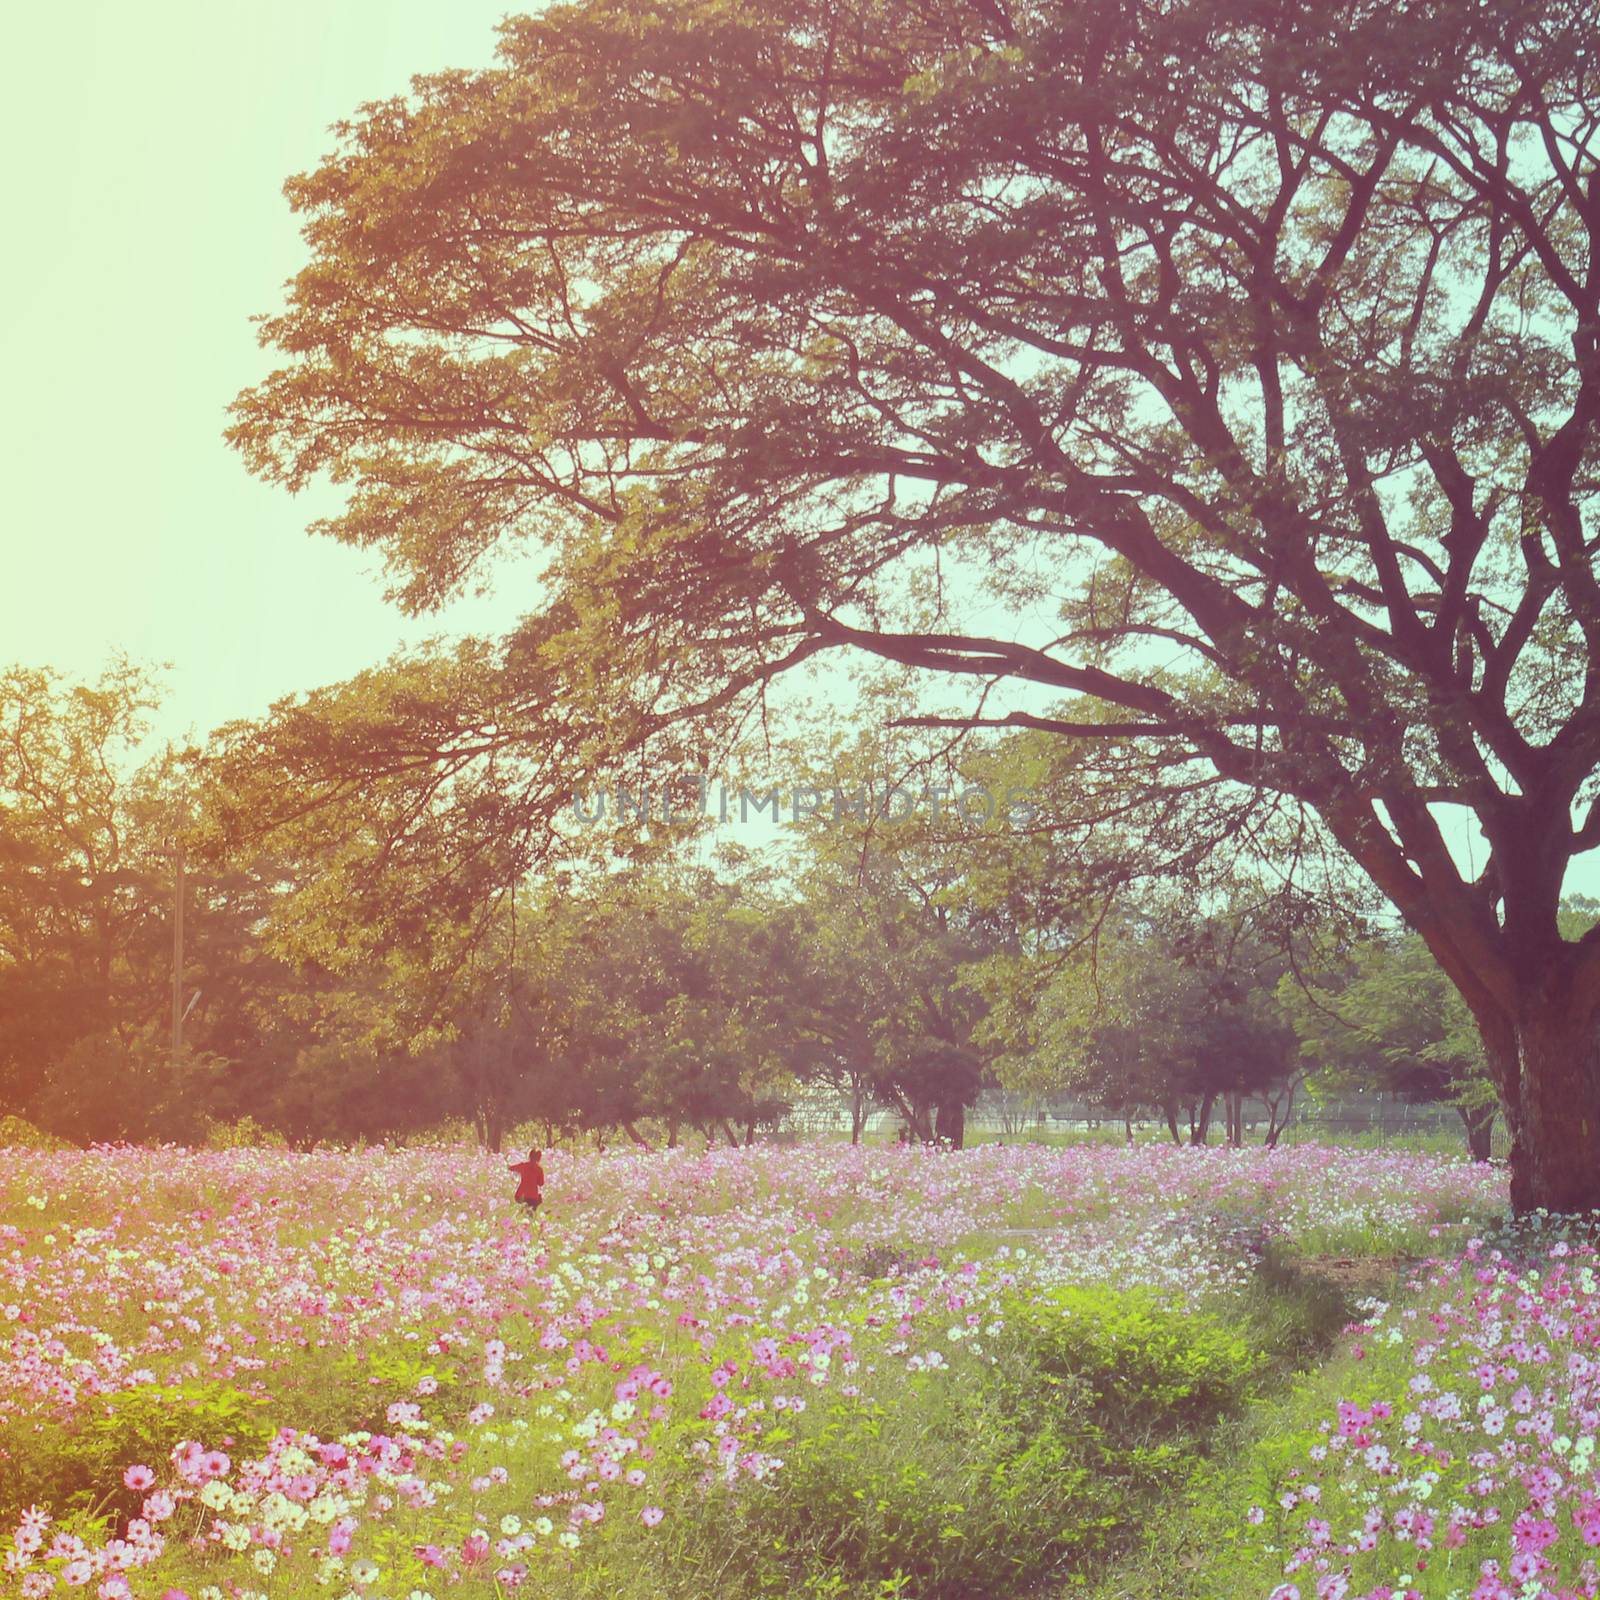 A woman walking in the flowered field with retro filter effect by nuchylee